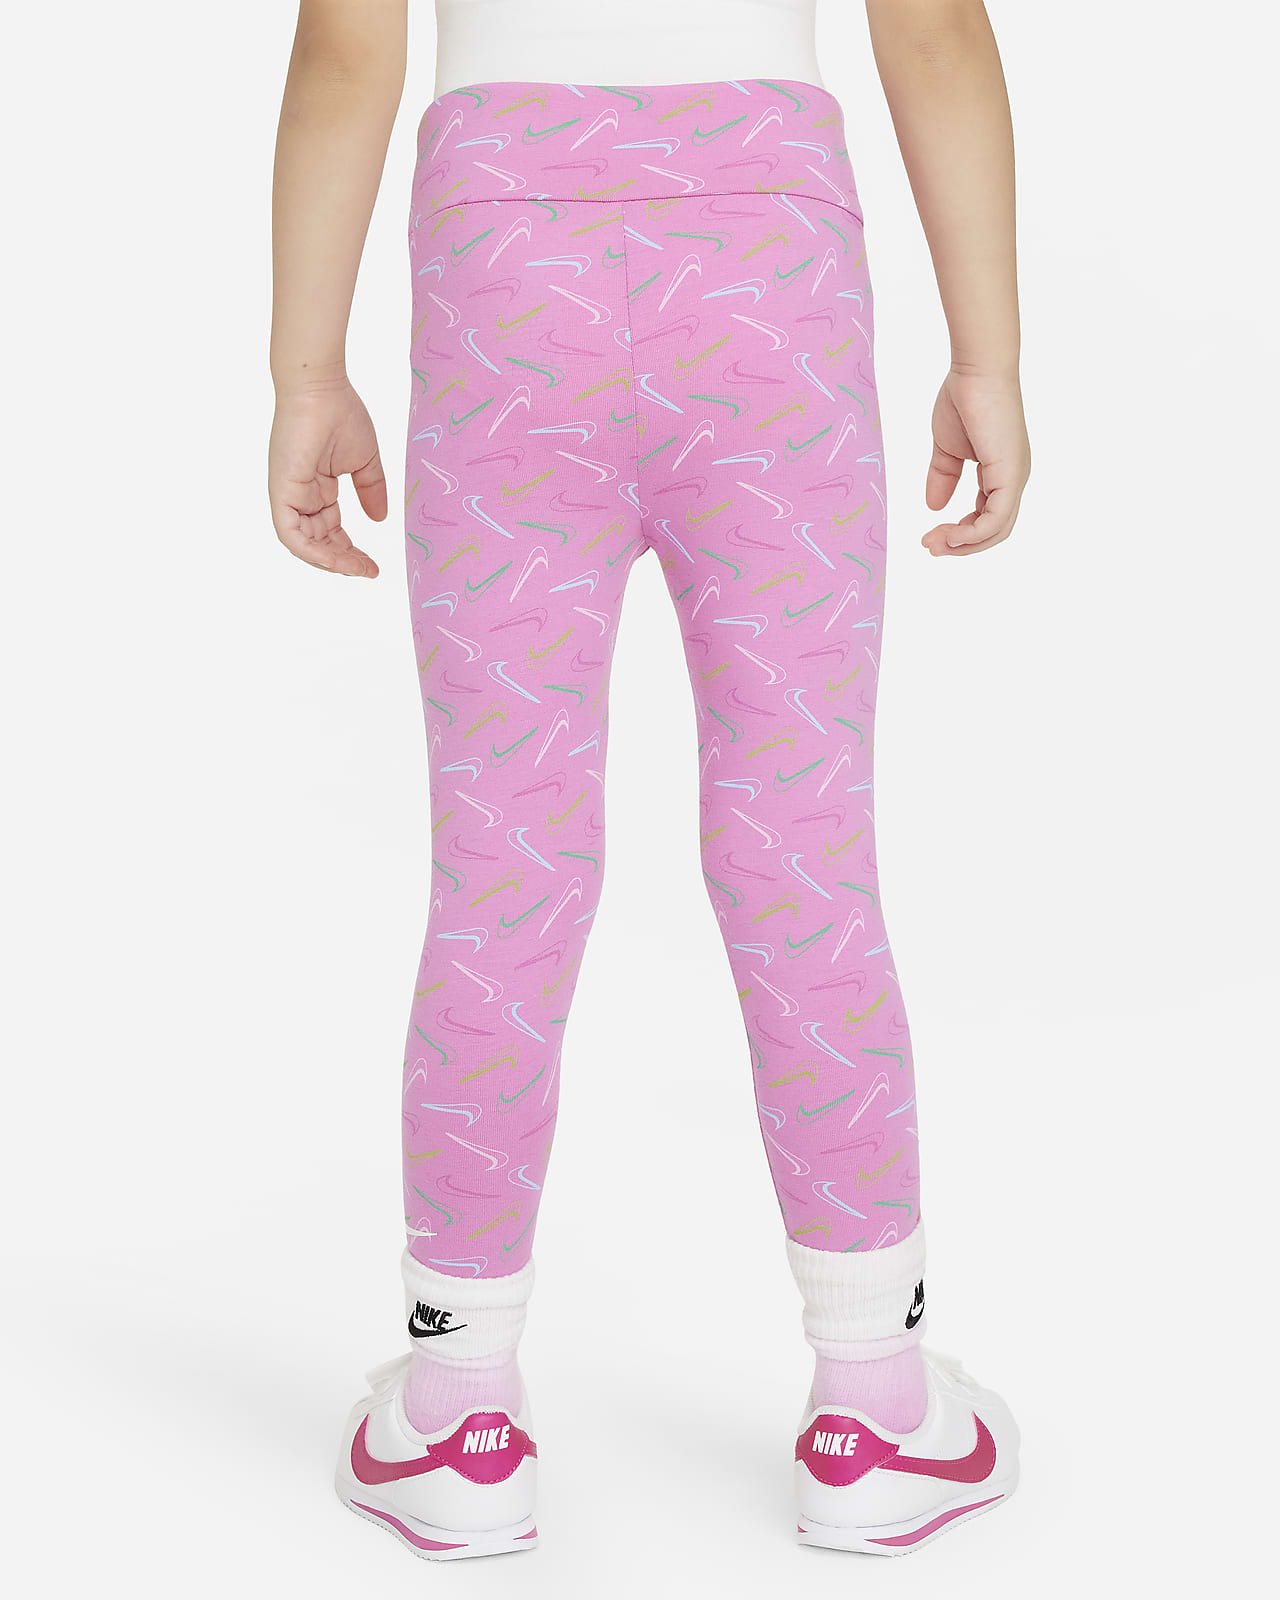 Leggings with brushed inside - Light purple - Kids | H&M IN